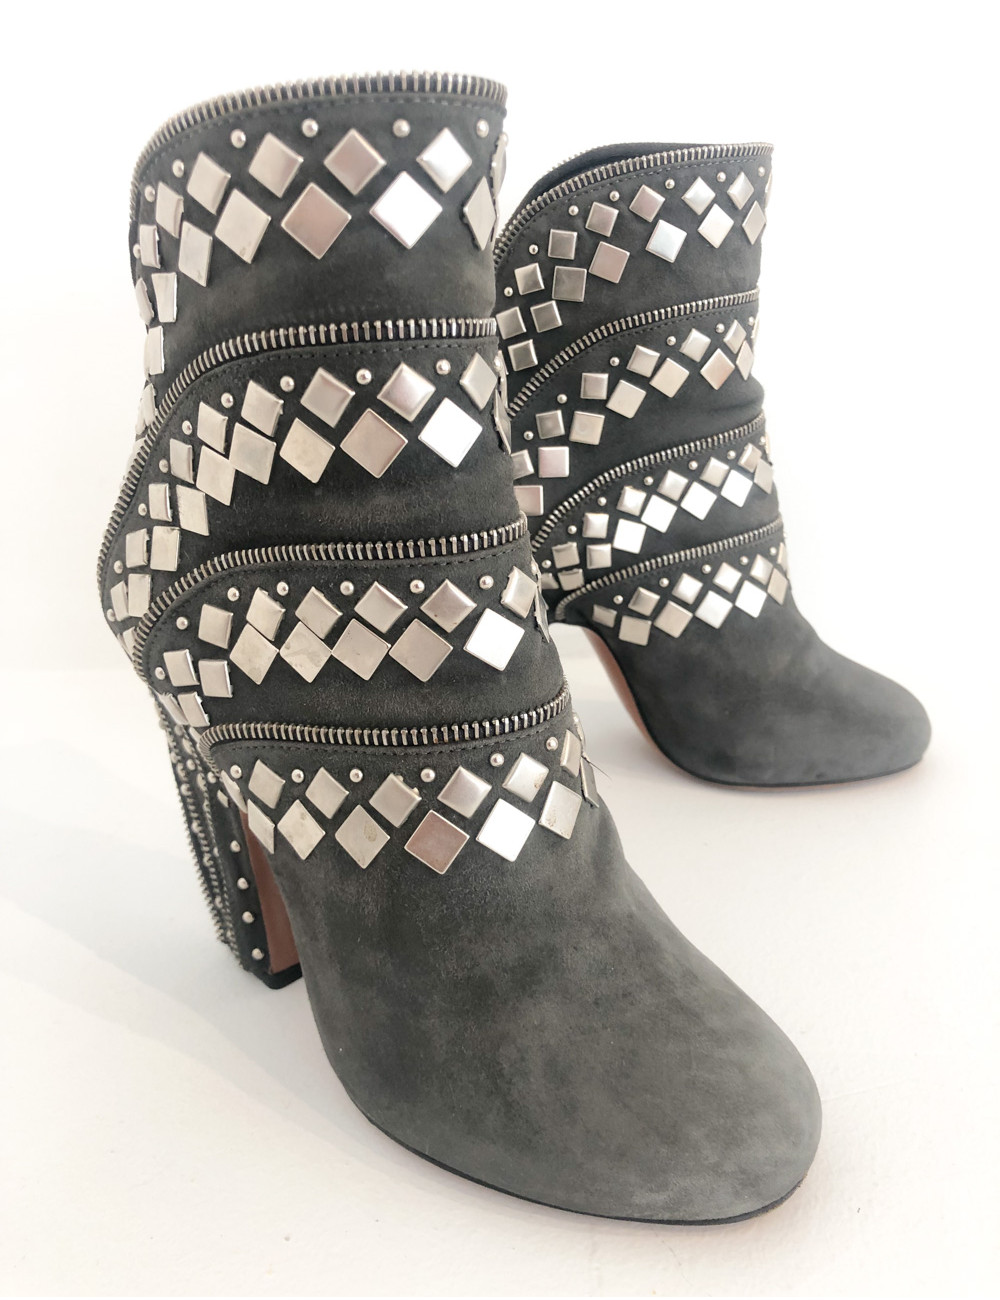 Grey Studded Ankle Boots on Sale | medialit.org